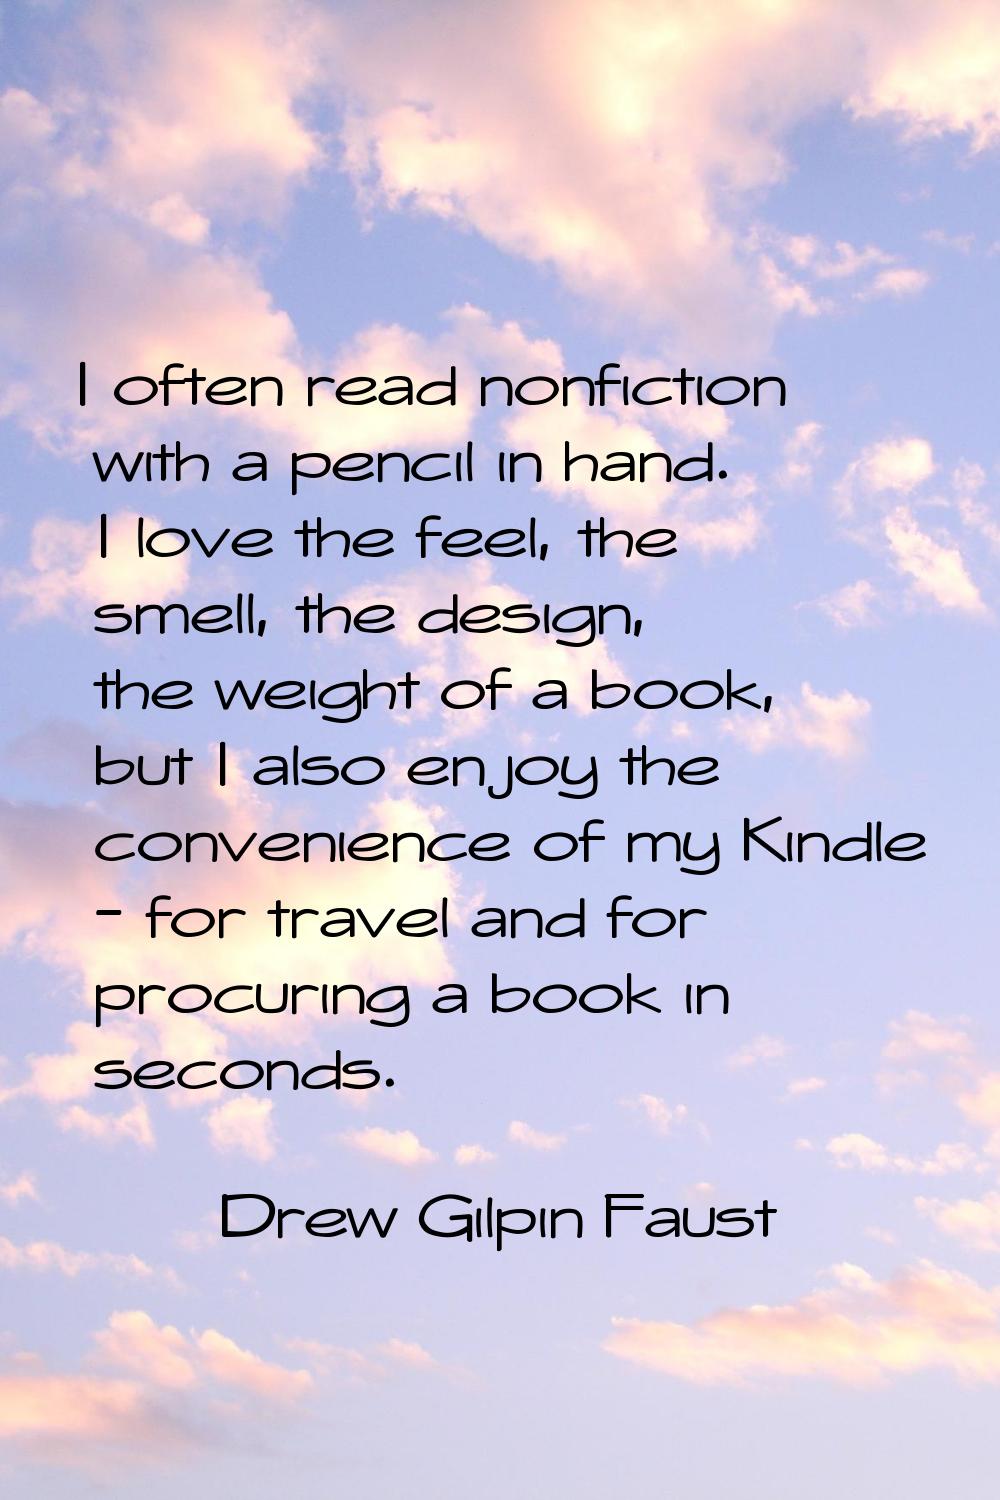 I often read nonfiction with a pencil in hand. I love the feel, the smell, the design, the weight o